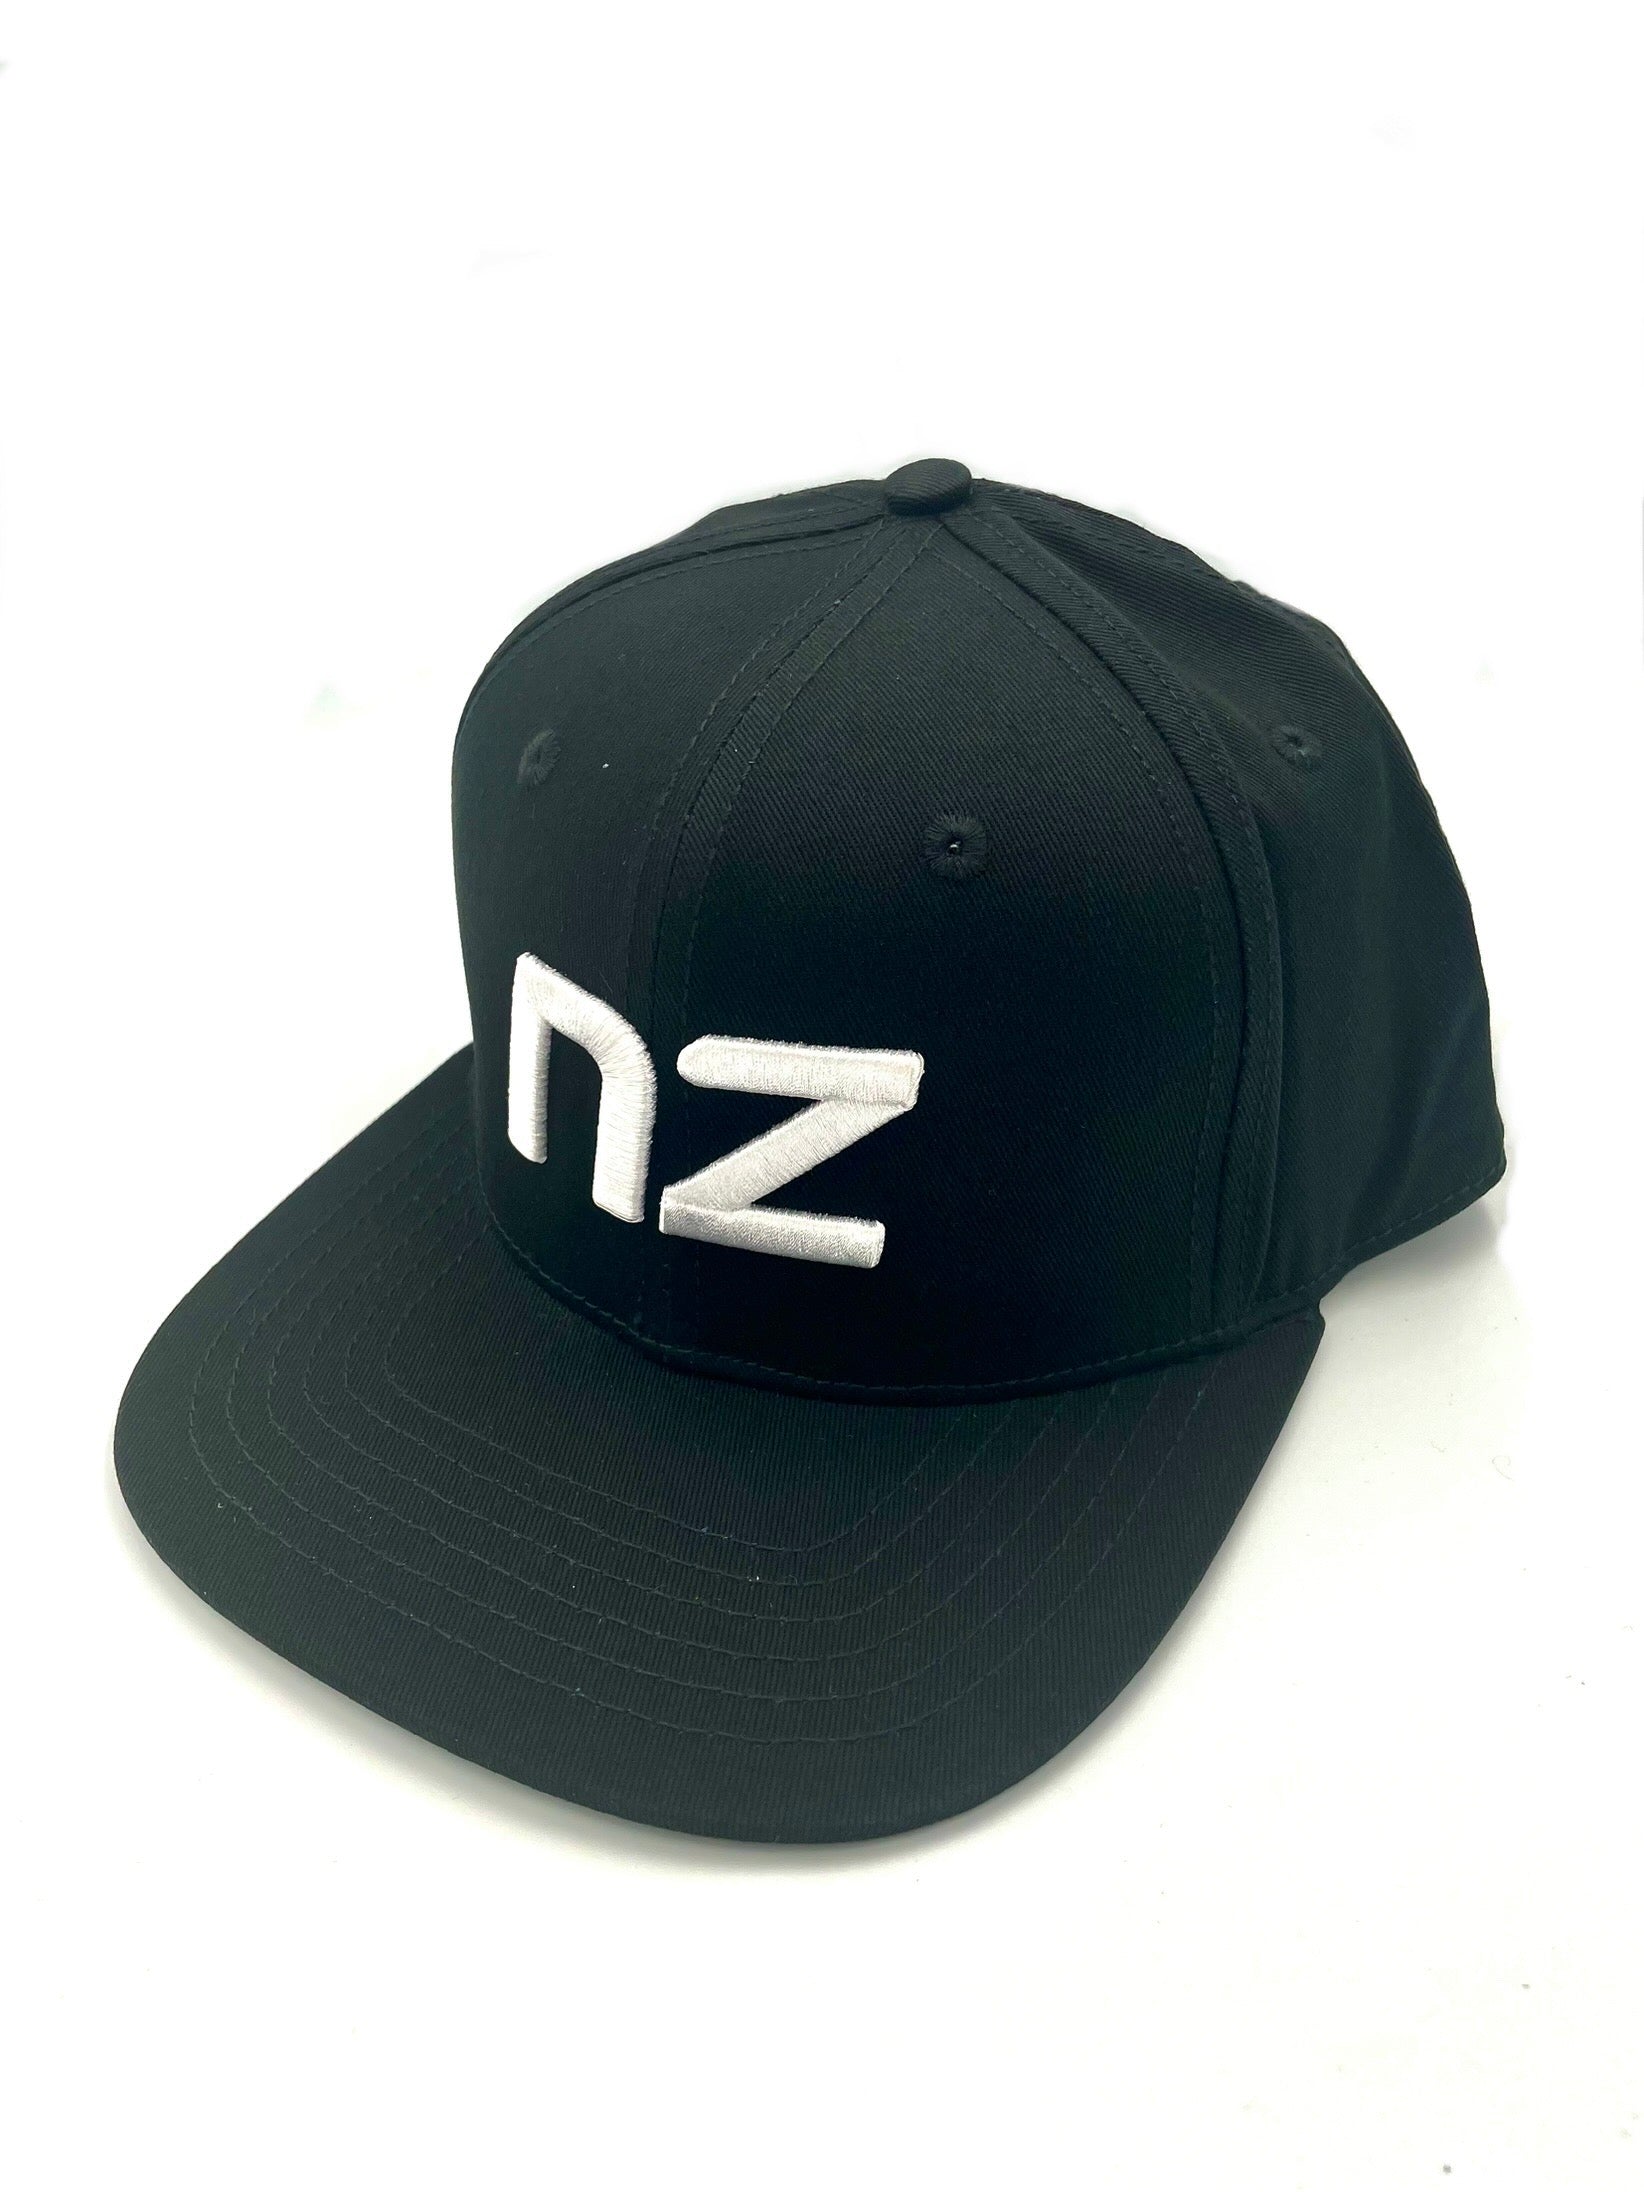 New Zealand Breakers Hat - Black Classic Icon Snapback - First Ever